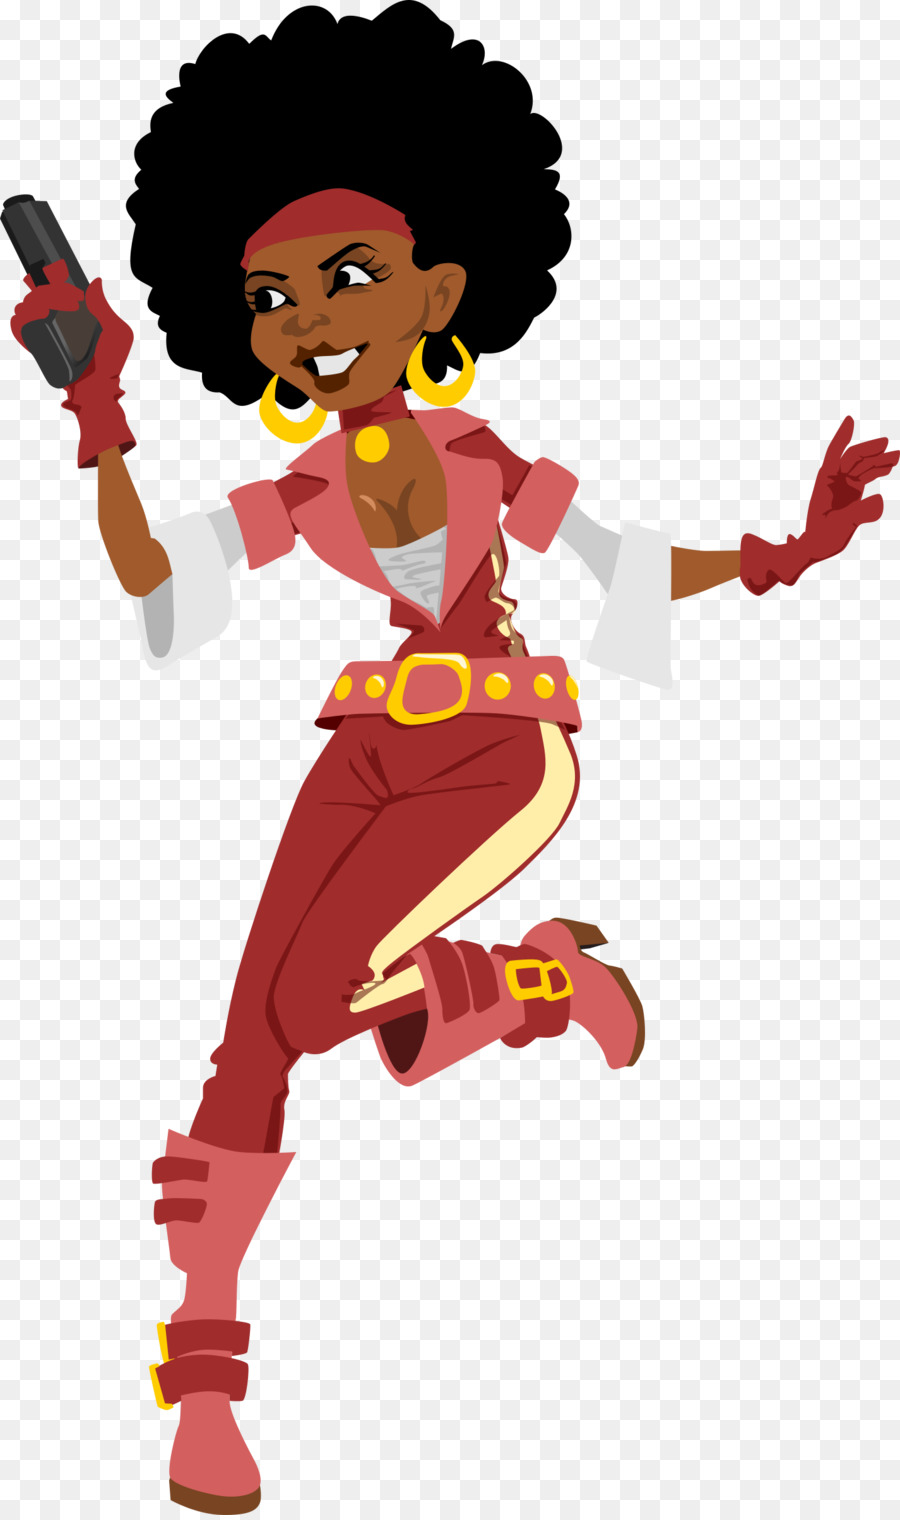 African clipart person african. Dance american woman clip